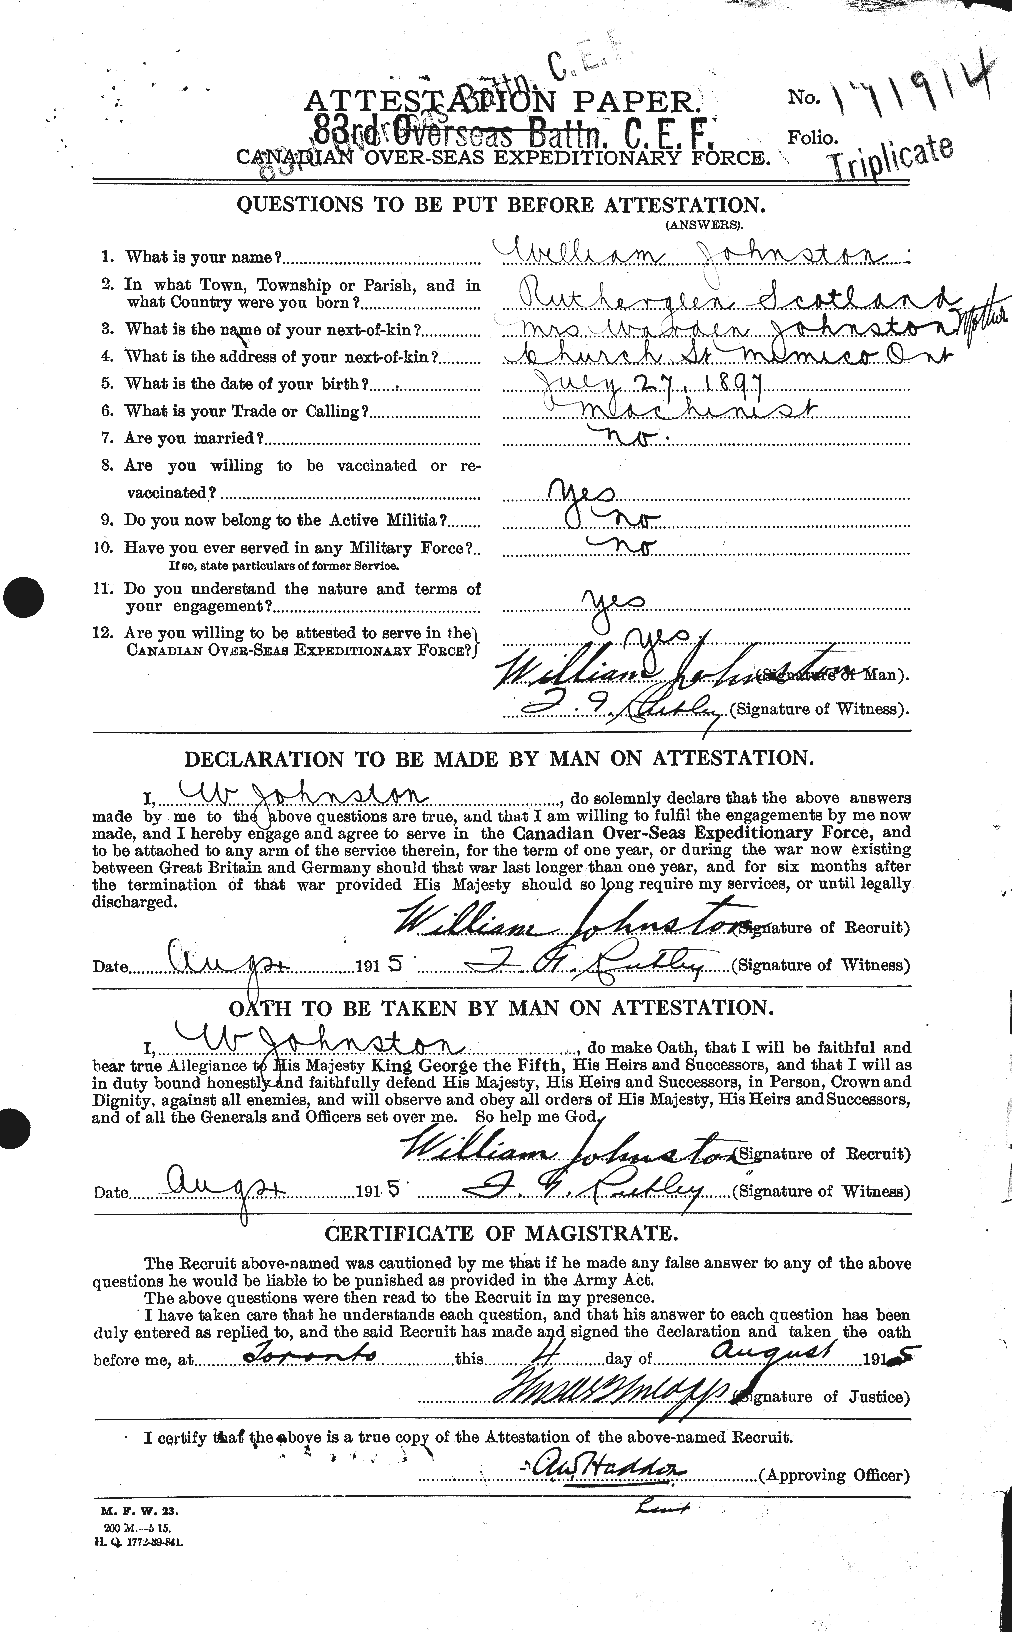 Personnel Records of the First World War - CEF 427275a